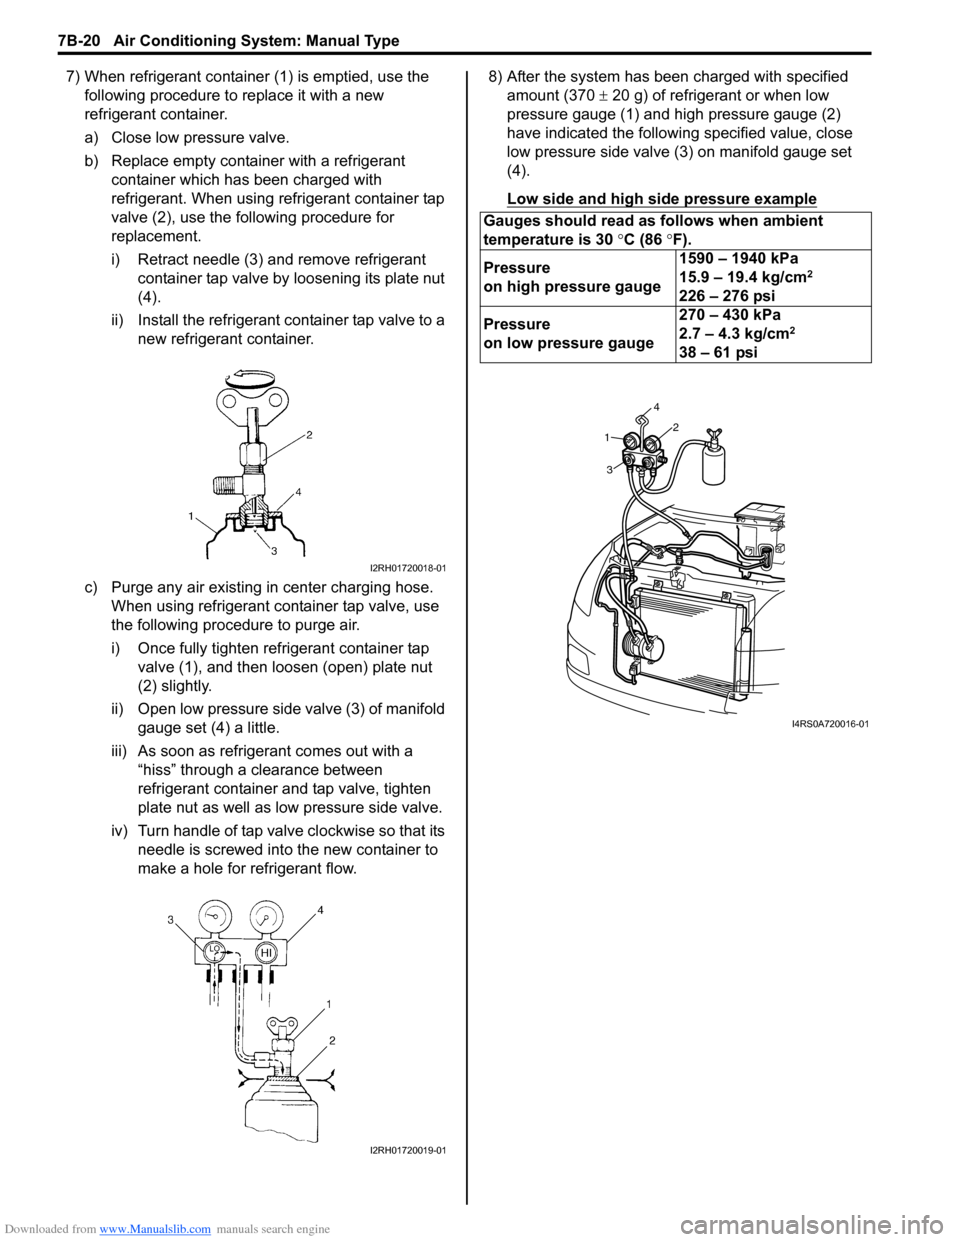 SUZUKI SWIFT 2006 2.G Service Owners Manual Downloaded from www.Manualslib.com manuals search engine 7B-20 Air Conditioning System: Manual Type
7) When refrigerant container (1) is emptied, use the following procedure to replace it with a new 
